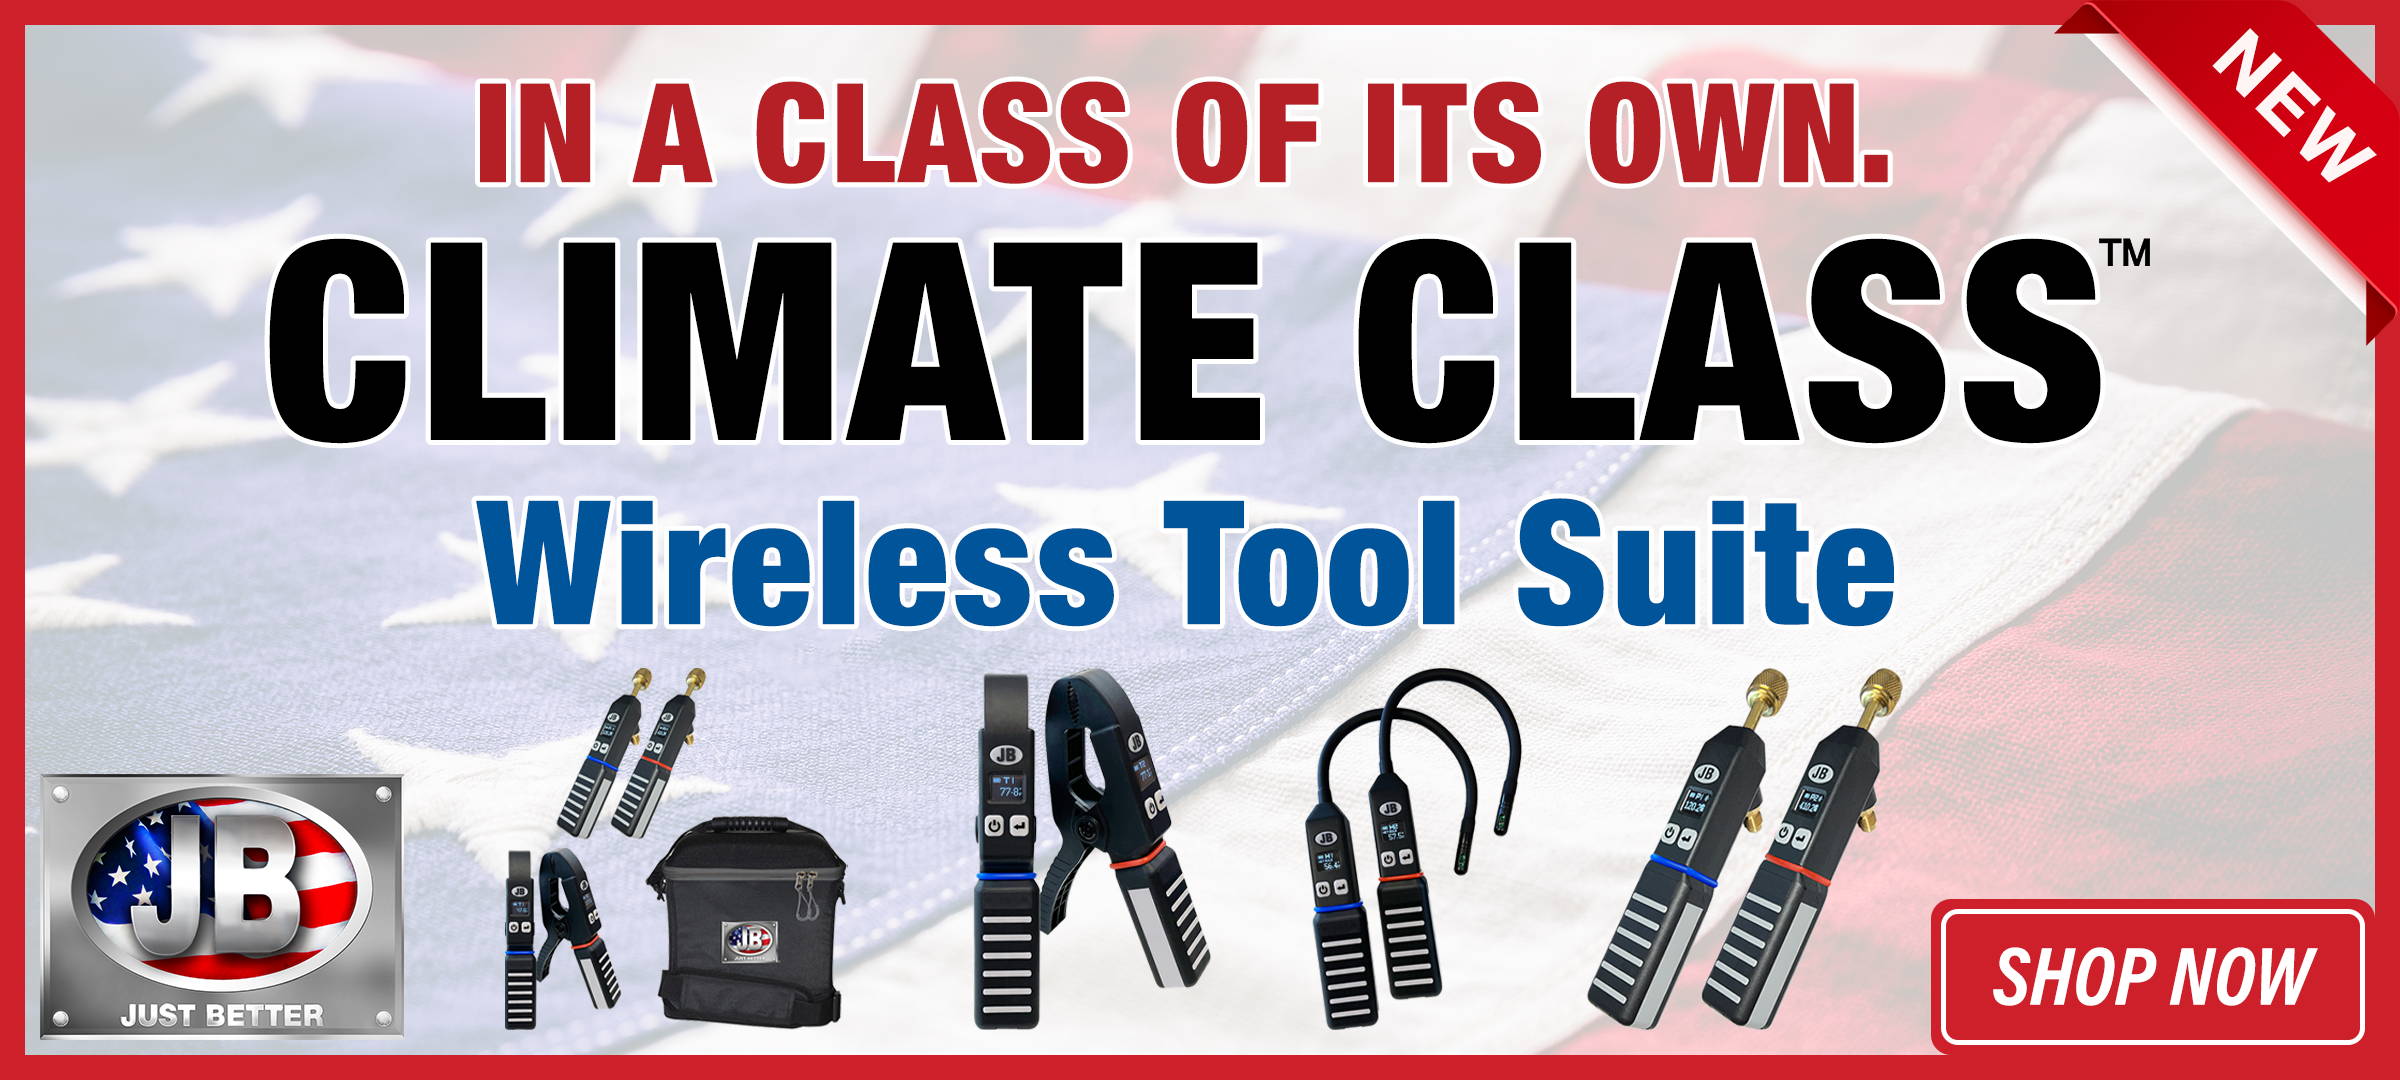 JB Climate Class products are in a class of their own. Shop now